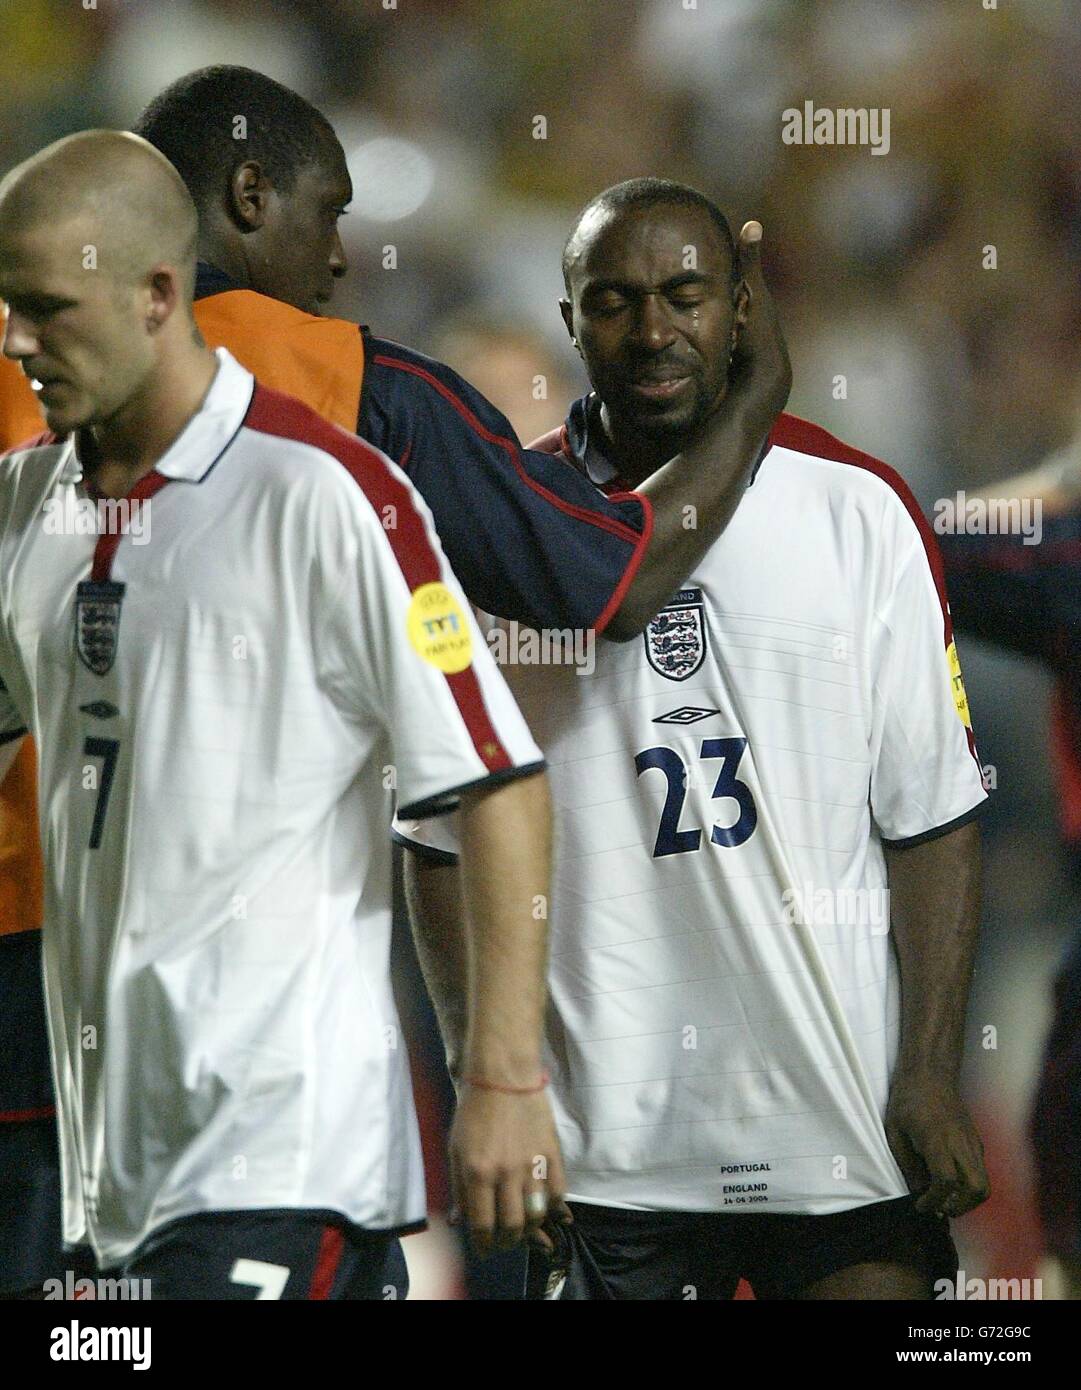 England's Darius Vassell cries after missing penalty against Portugal during the Euro 2004 quarter-final match at the Estadio da Luz, Lisbon, Portugal. England lost to Portugal 6-5 on penalties after the match ended in a 2-2 draw following extra-time. Stock Photo